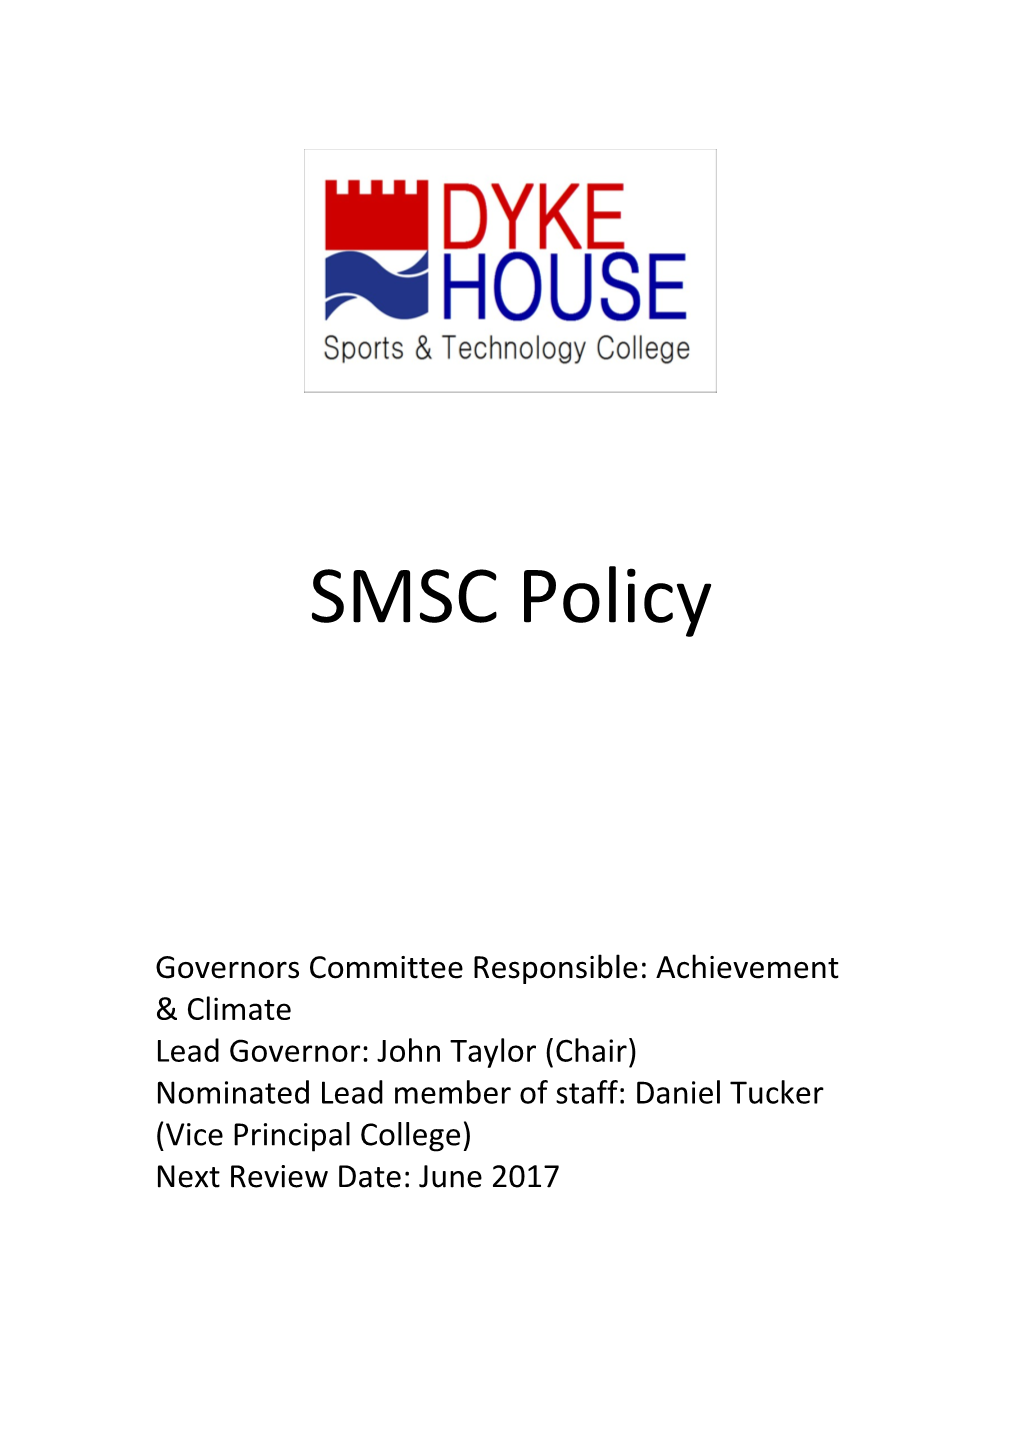 Governors Committee Responsible: Achievement & Climate